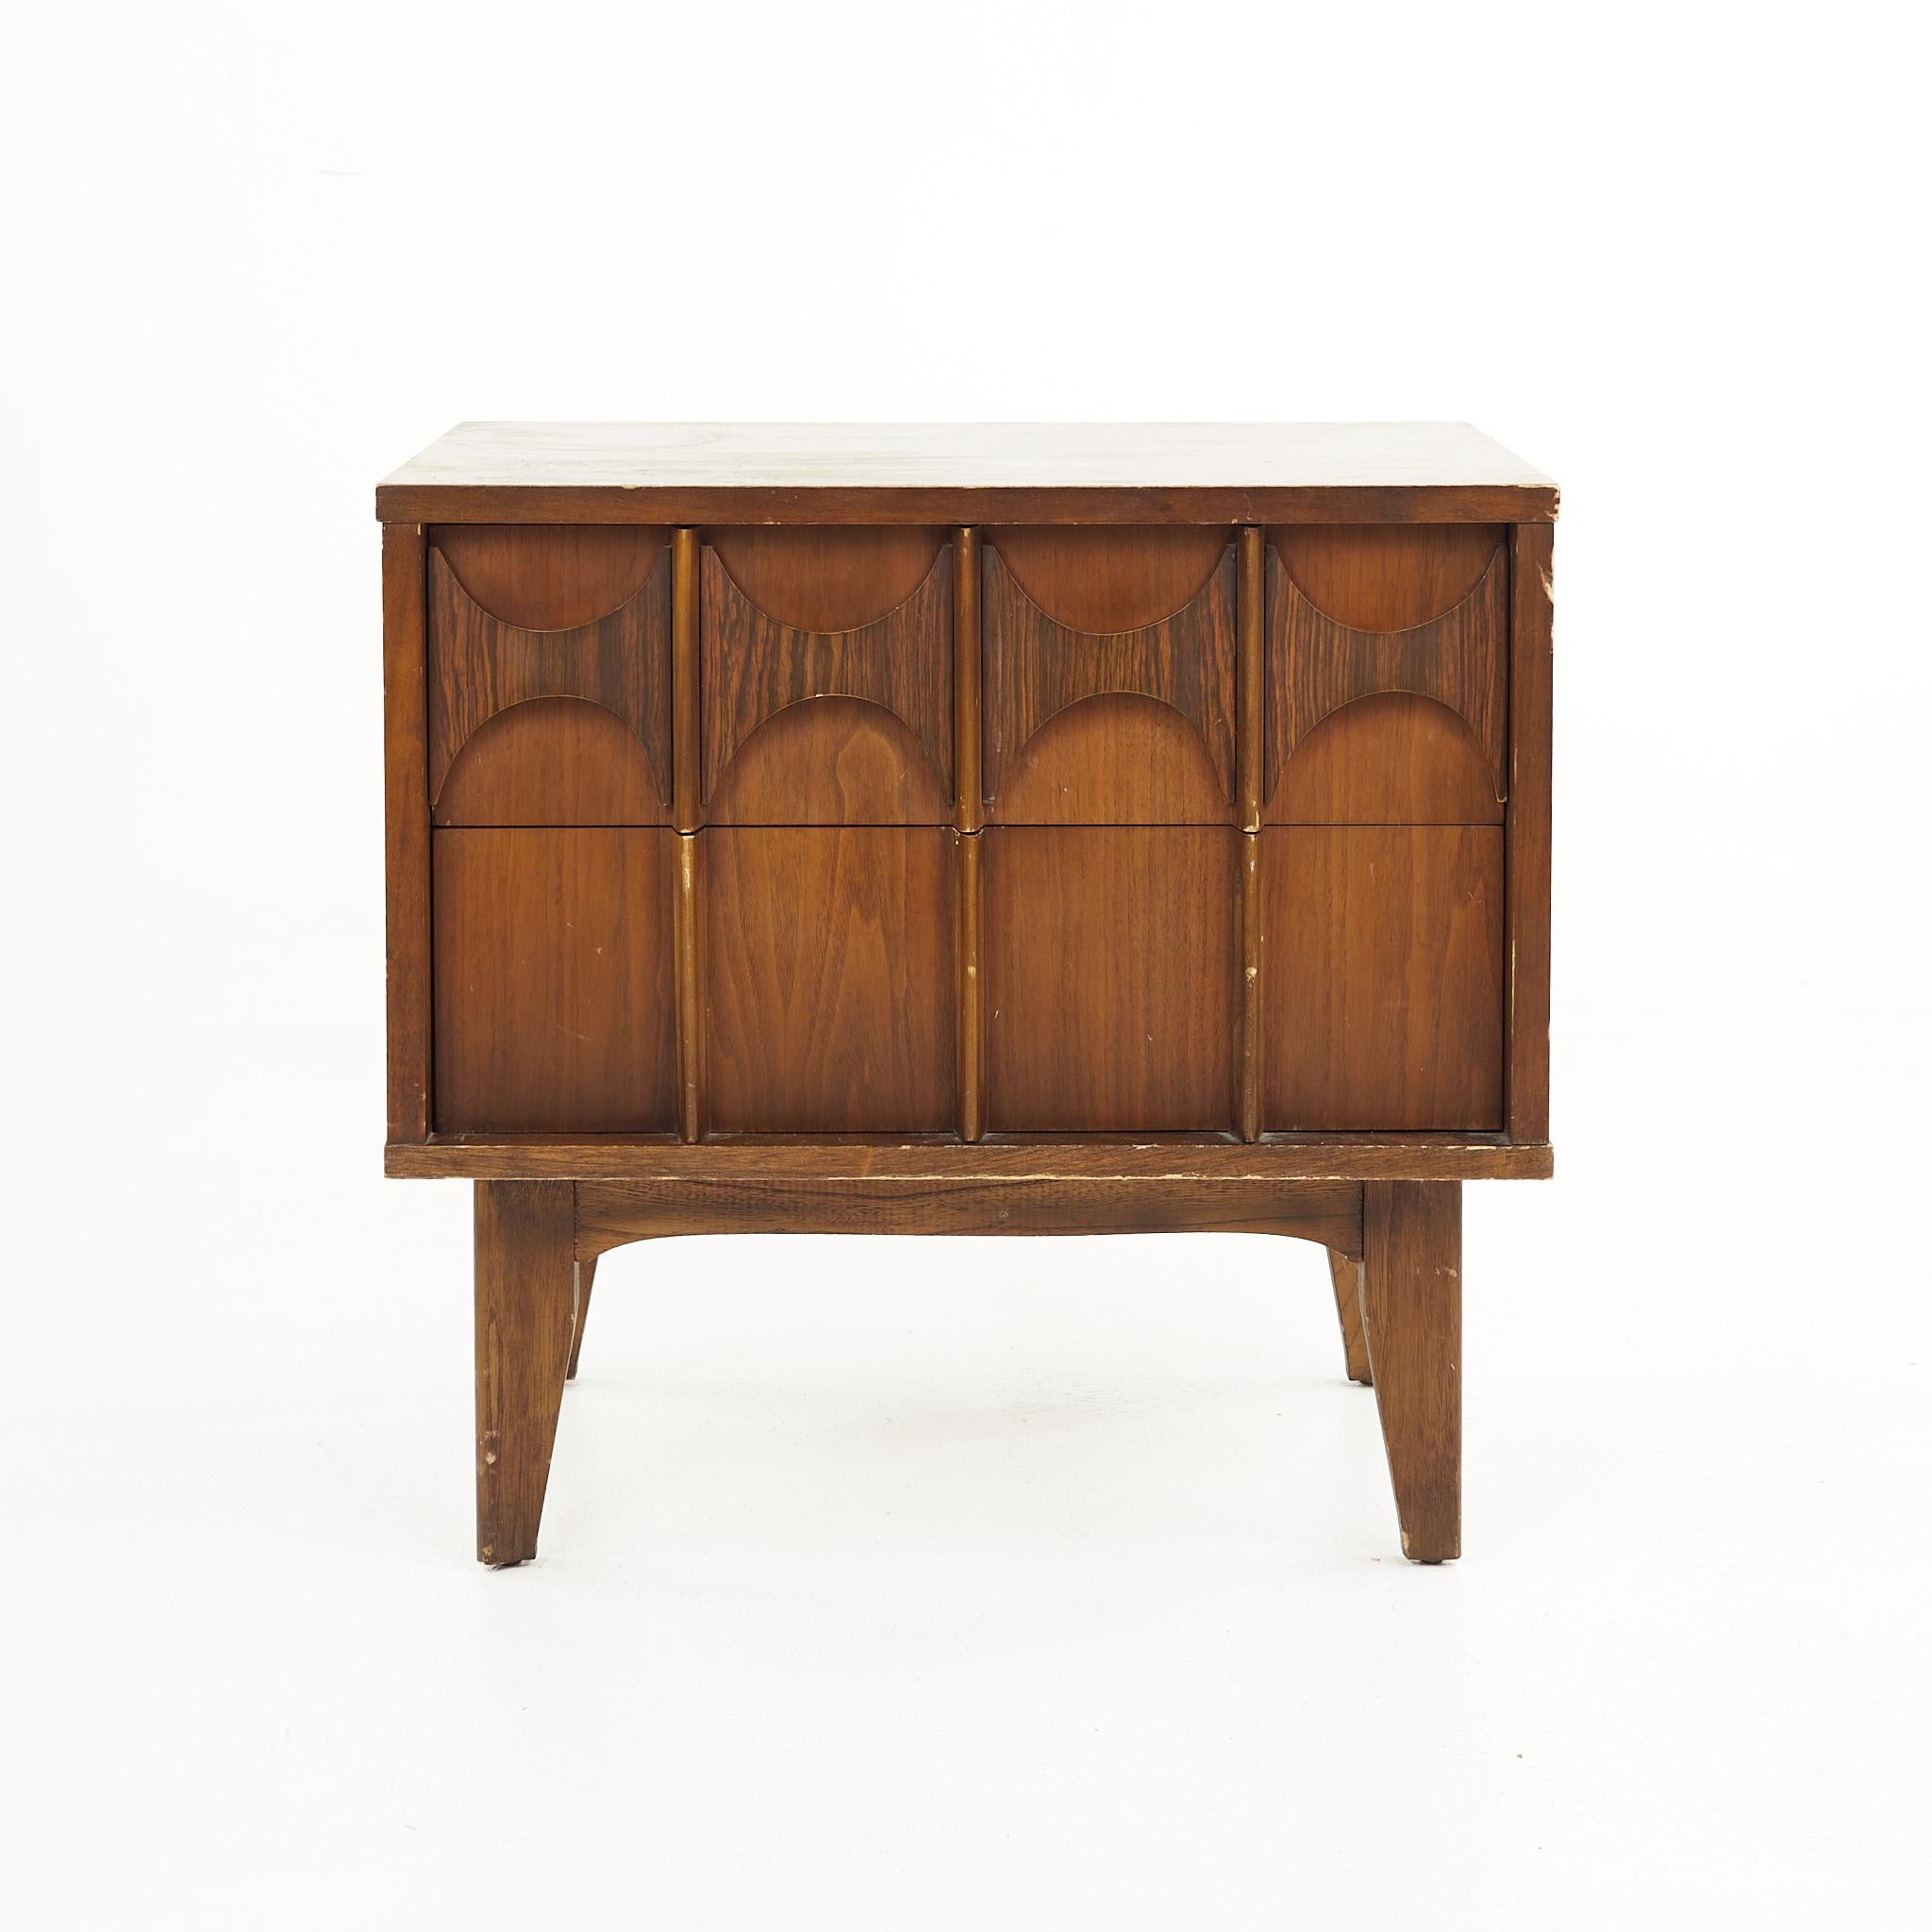 Kent Coffey Perspecta style mid century 2 drawer nightstand

The nightstand measures: 24 wide x 15 deep x 23.25 inches high

All pieces of furniture can be had in what we call restored vintage condition. That means the piece is restored upon